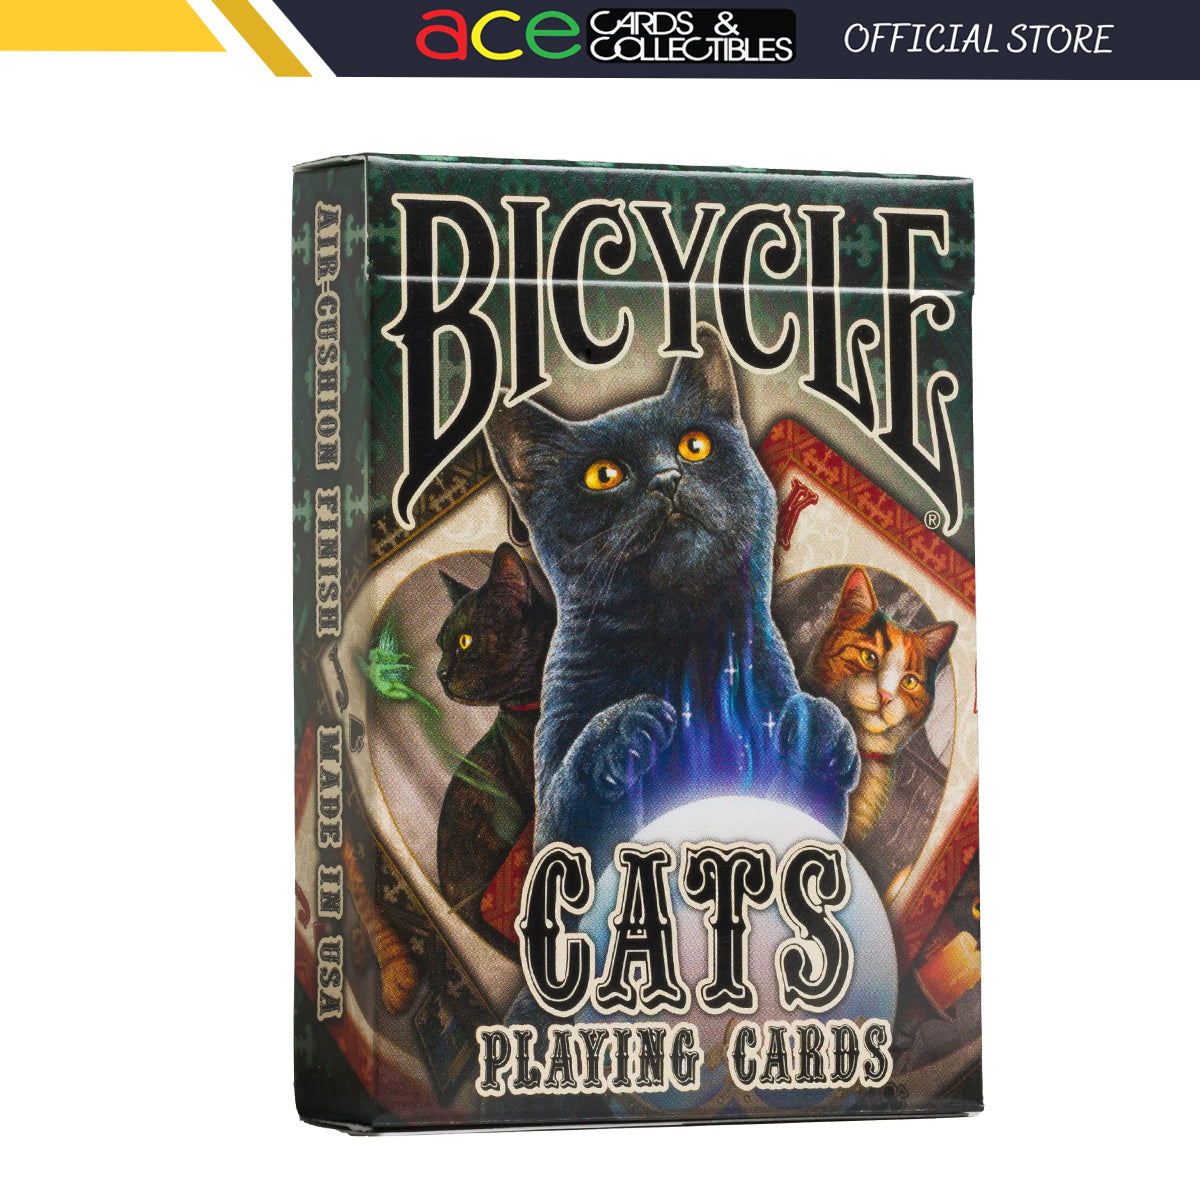 Bicycle Cats Playing Cards-United States Playing Cards Company-Ace Cards & Collectibles